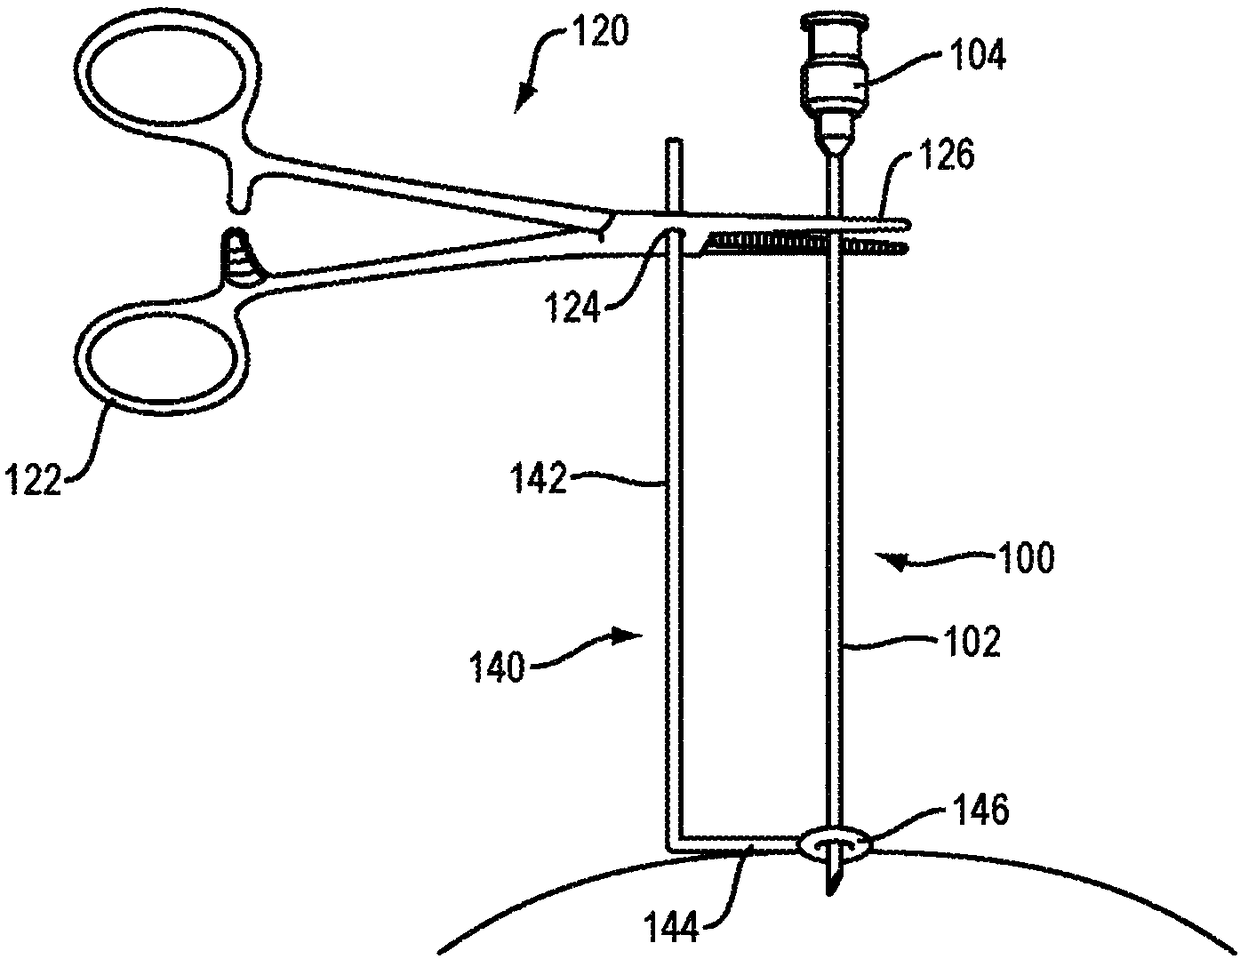 Devices and methods for guiding a surgical instrument